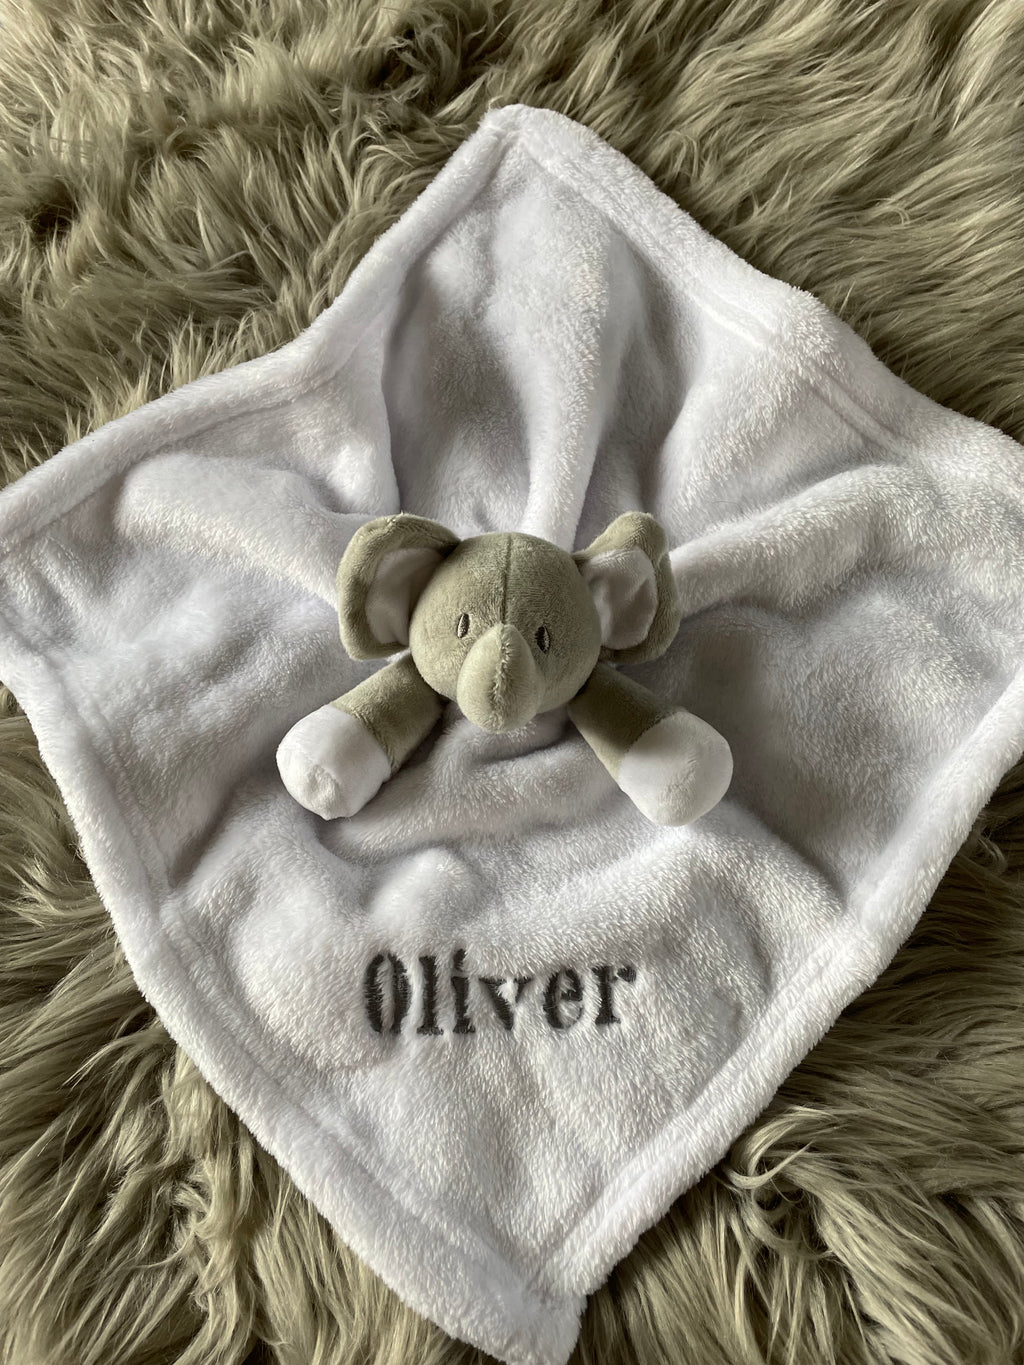 Embroidered White & Grey Baby Elephant Comforter